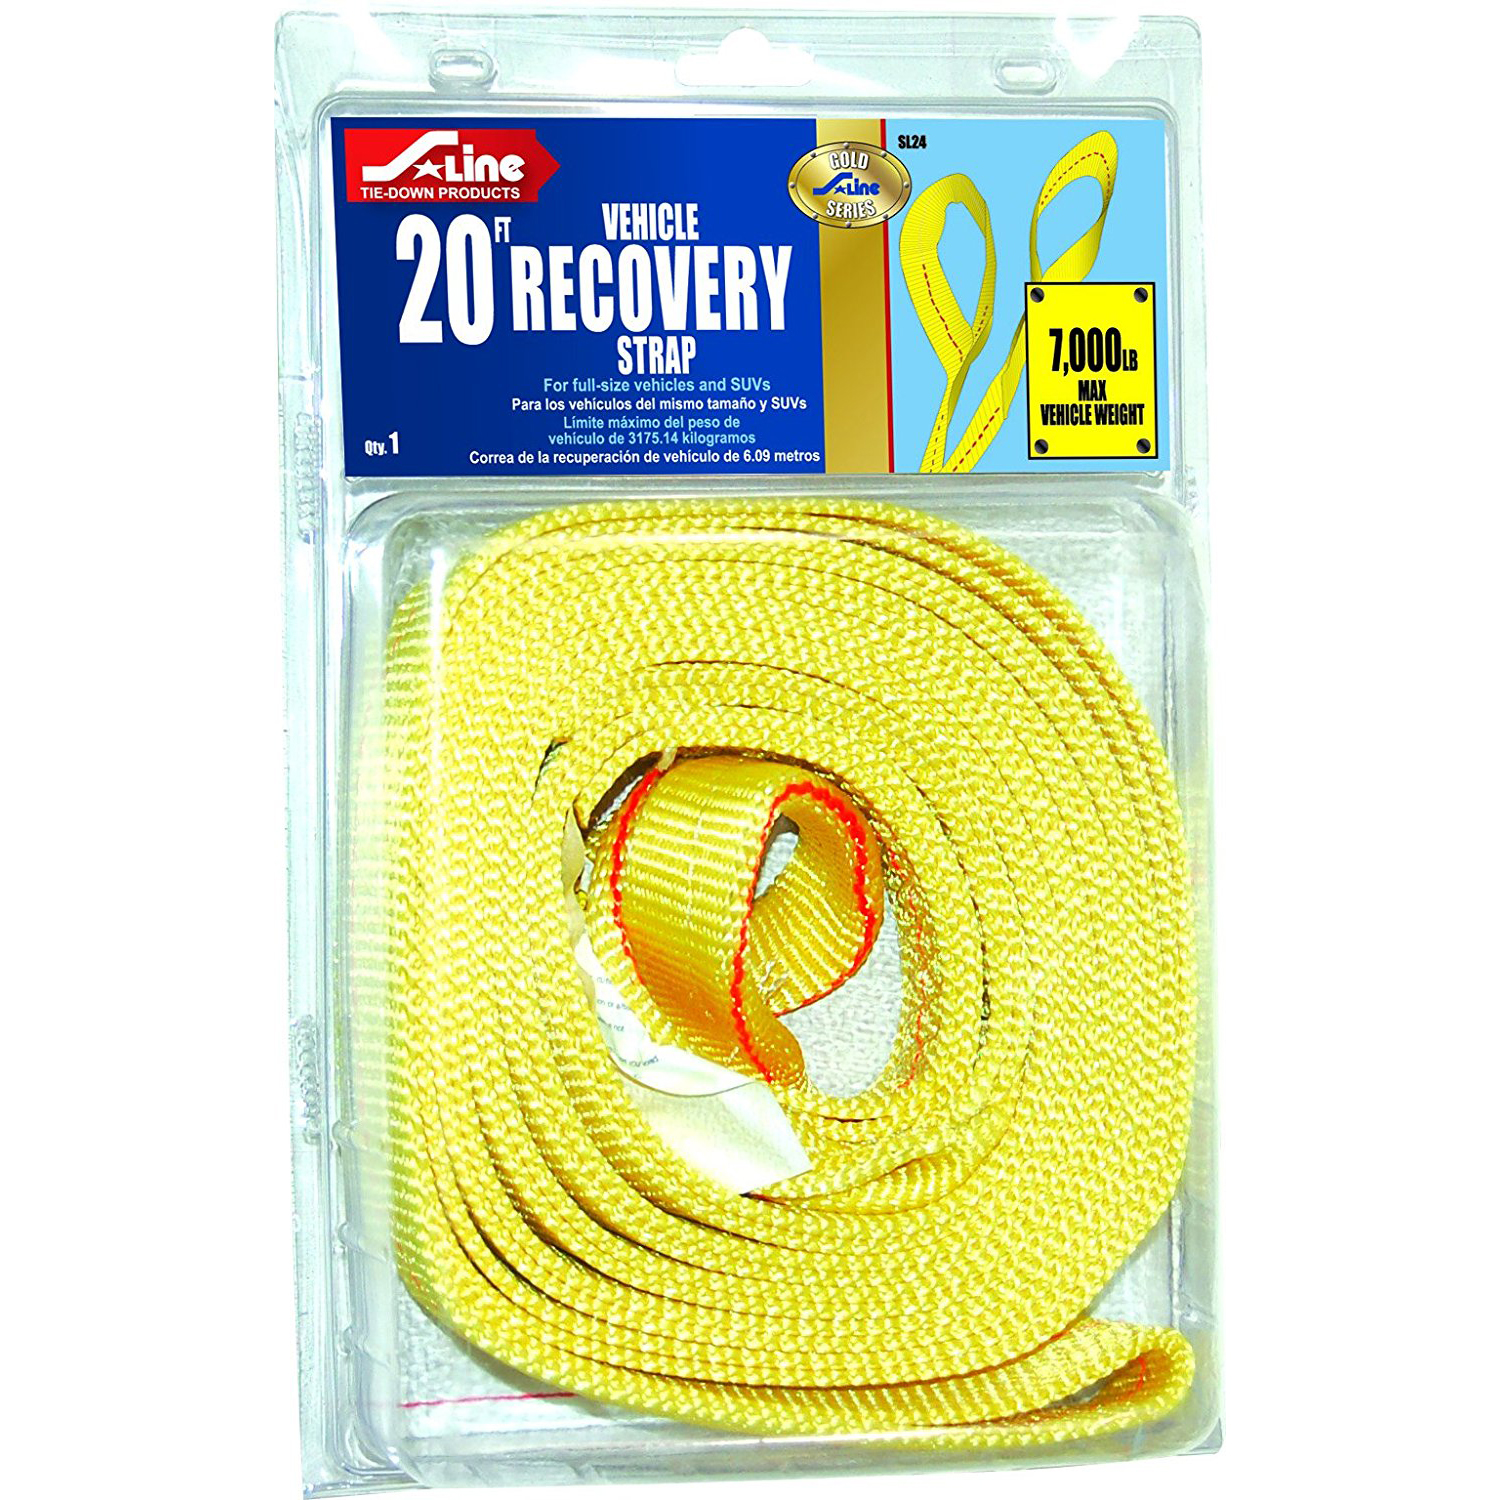 RECOVERY STRAP 2 X 20